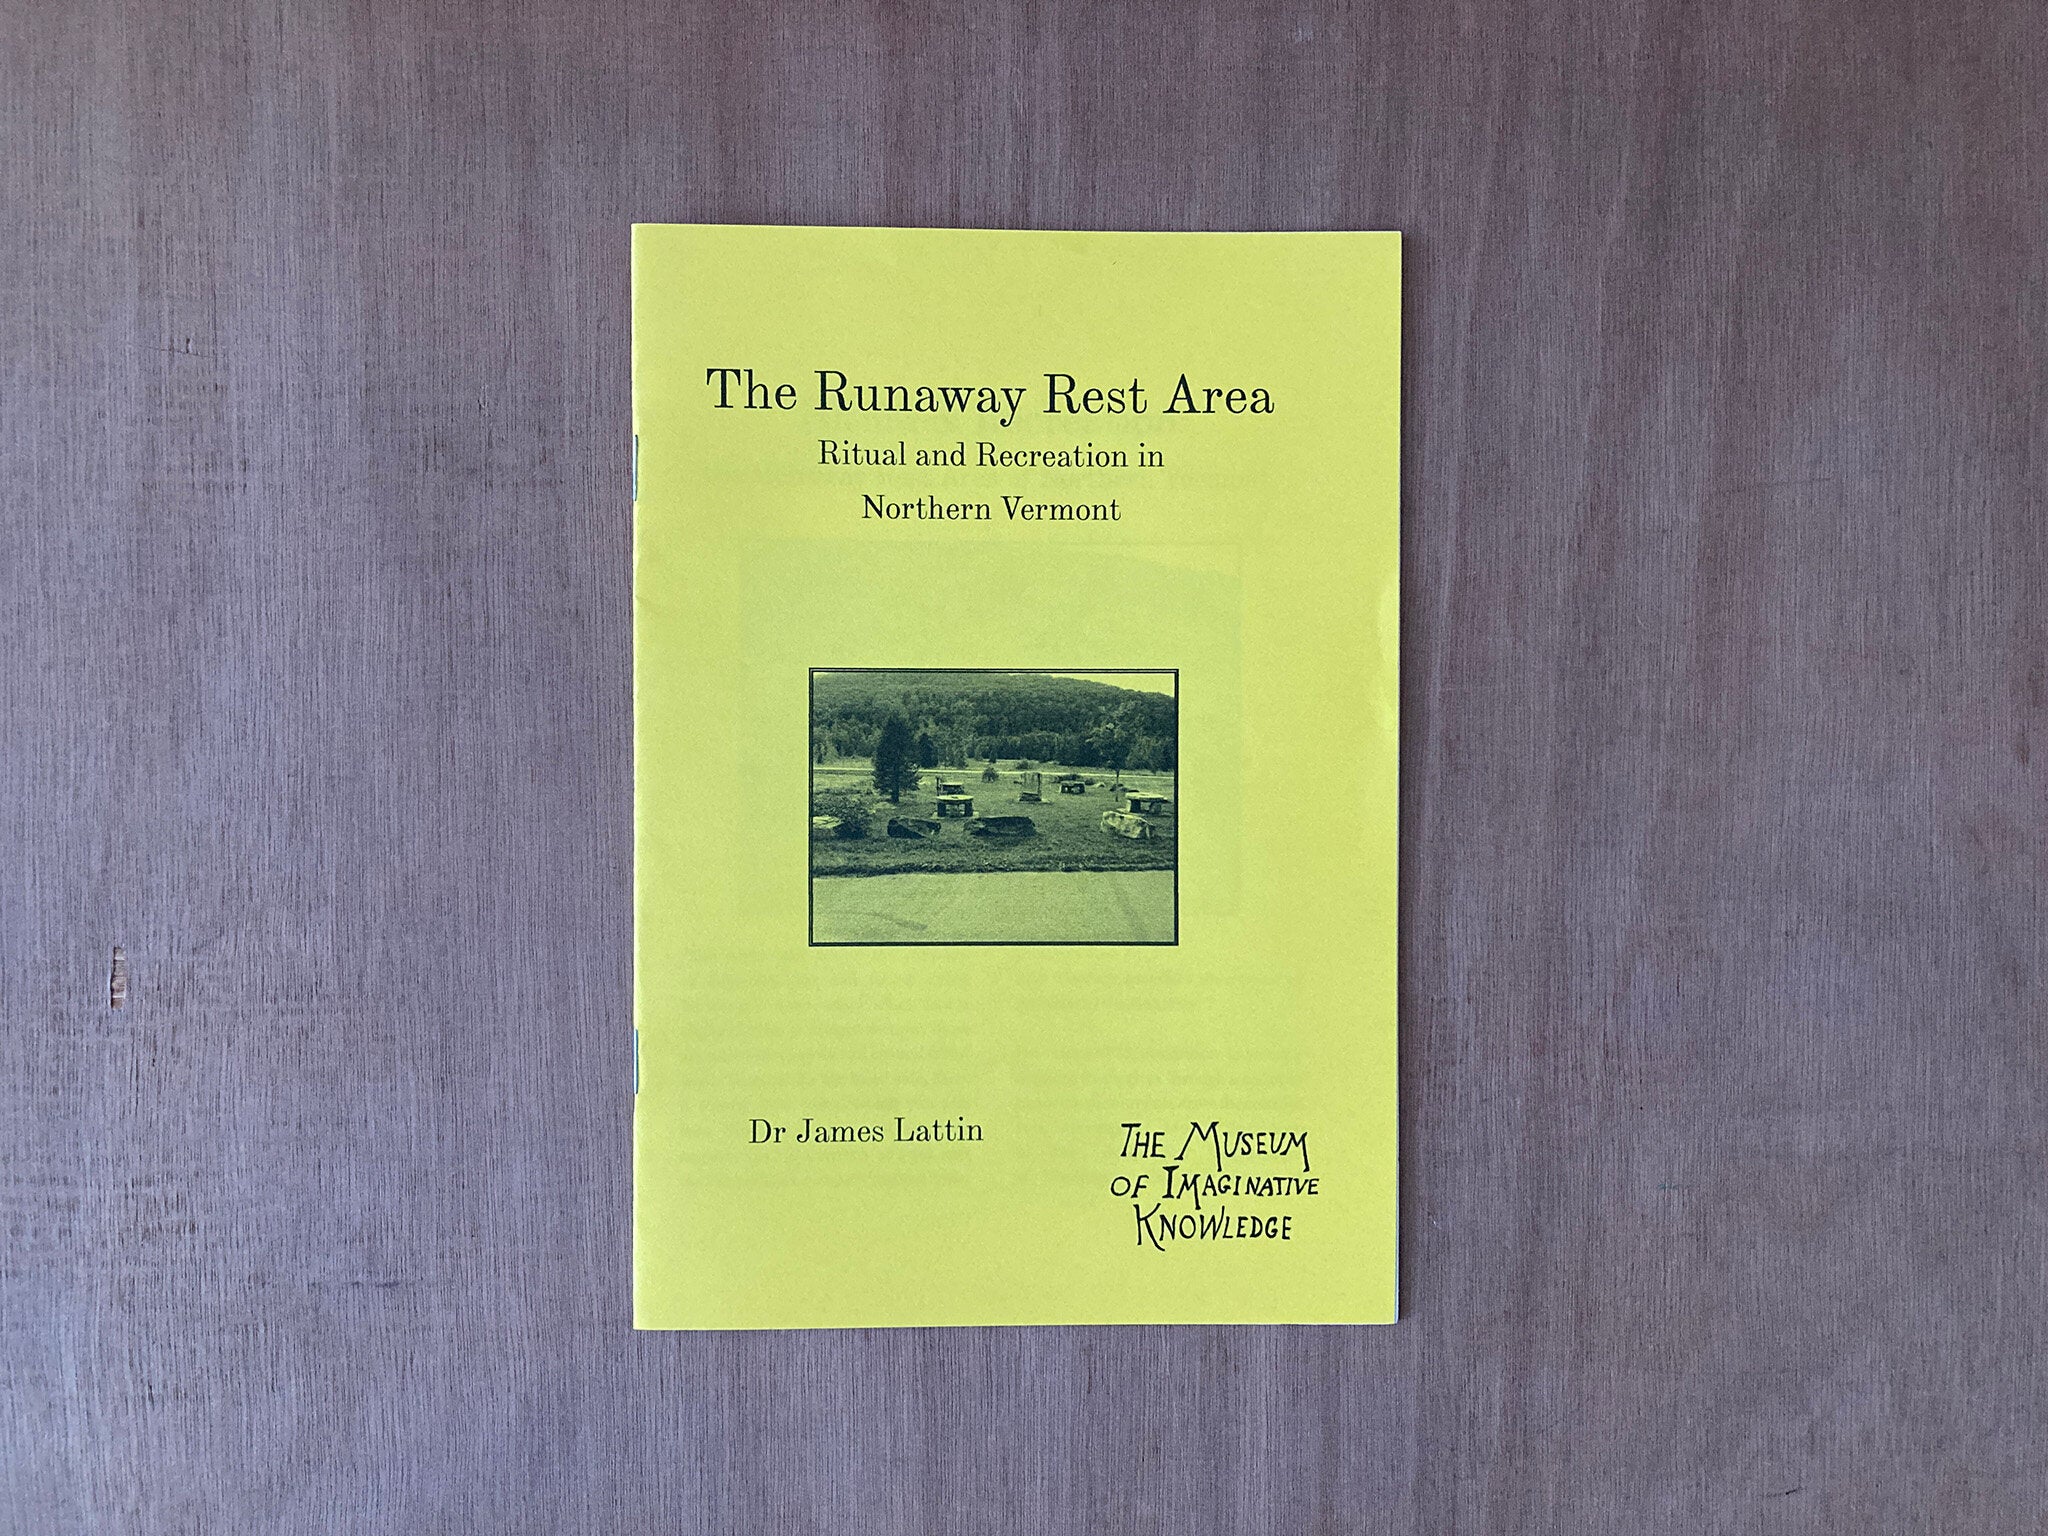 THE RUNAWAY REST AREA by Dr James Lattin